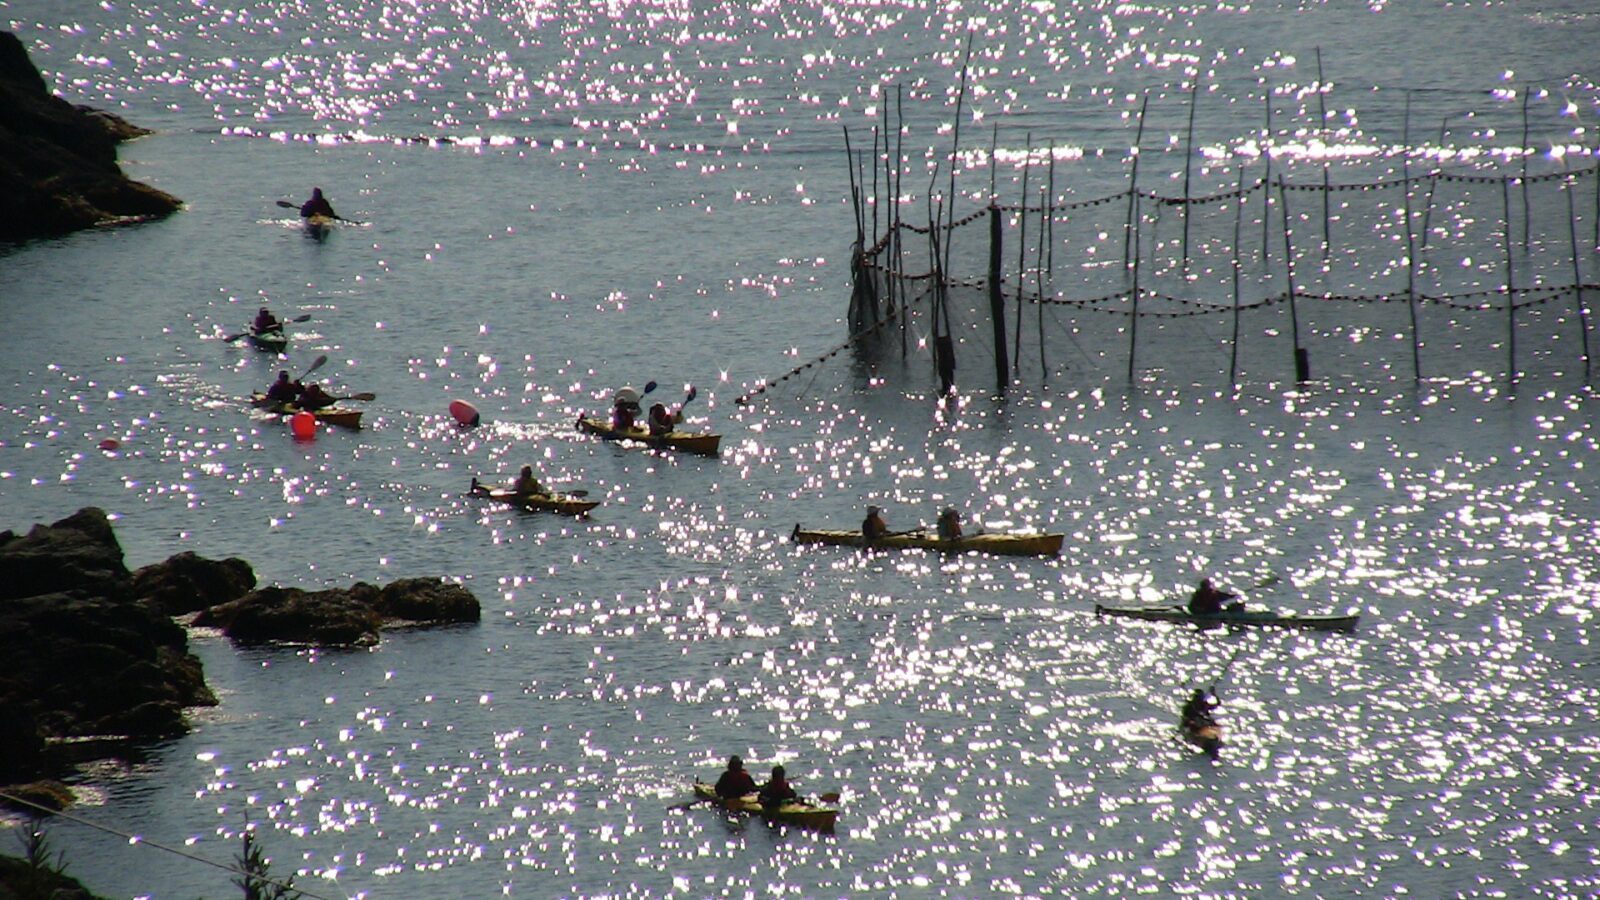 A group of people in canoes in the water.